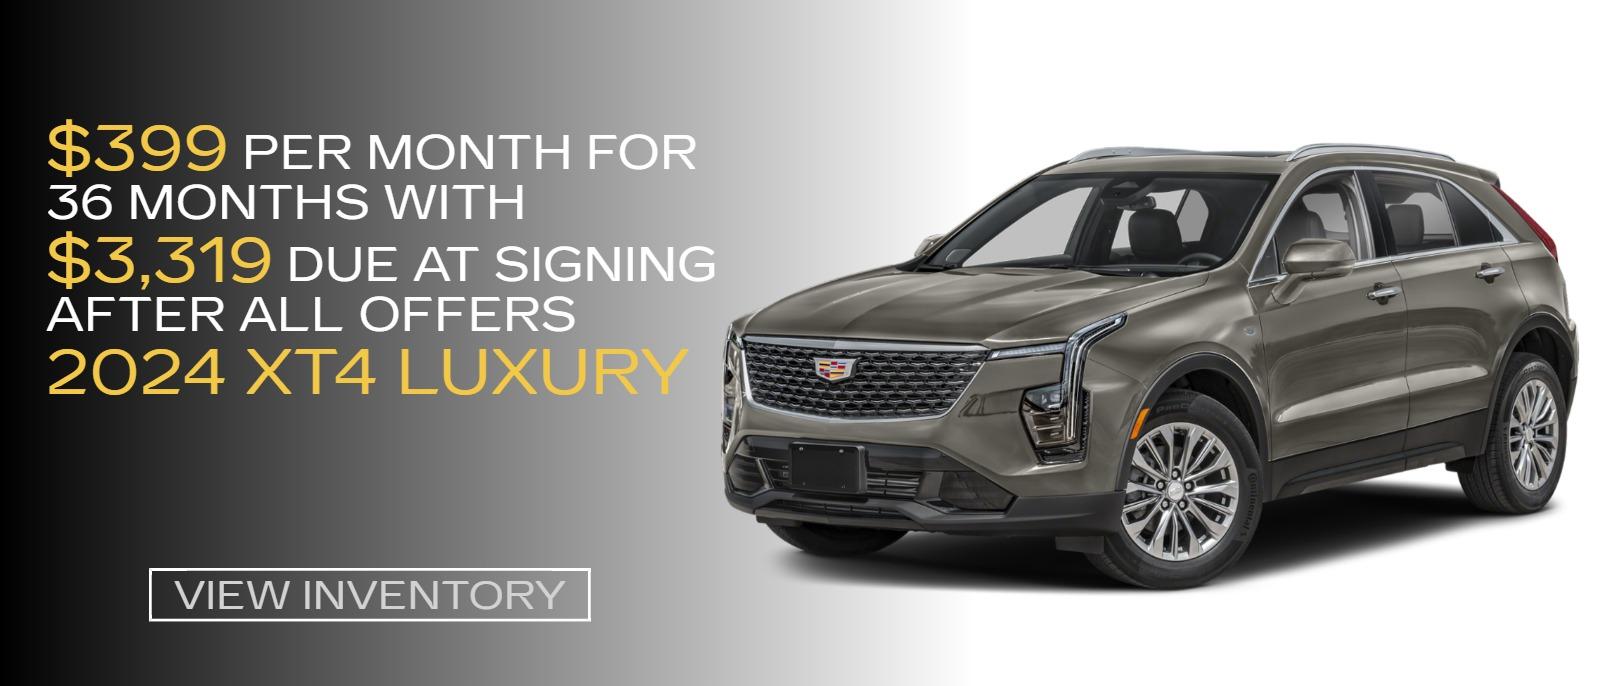 399 PER MONTH FOR 36 MONTHS WITH 3319 DUE AT SIGNING AFTER ALL OFFERS 2024 XT4 LUXURY